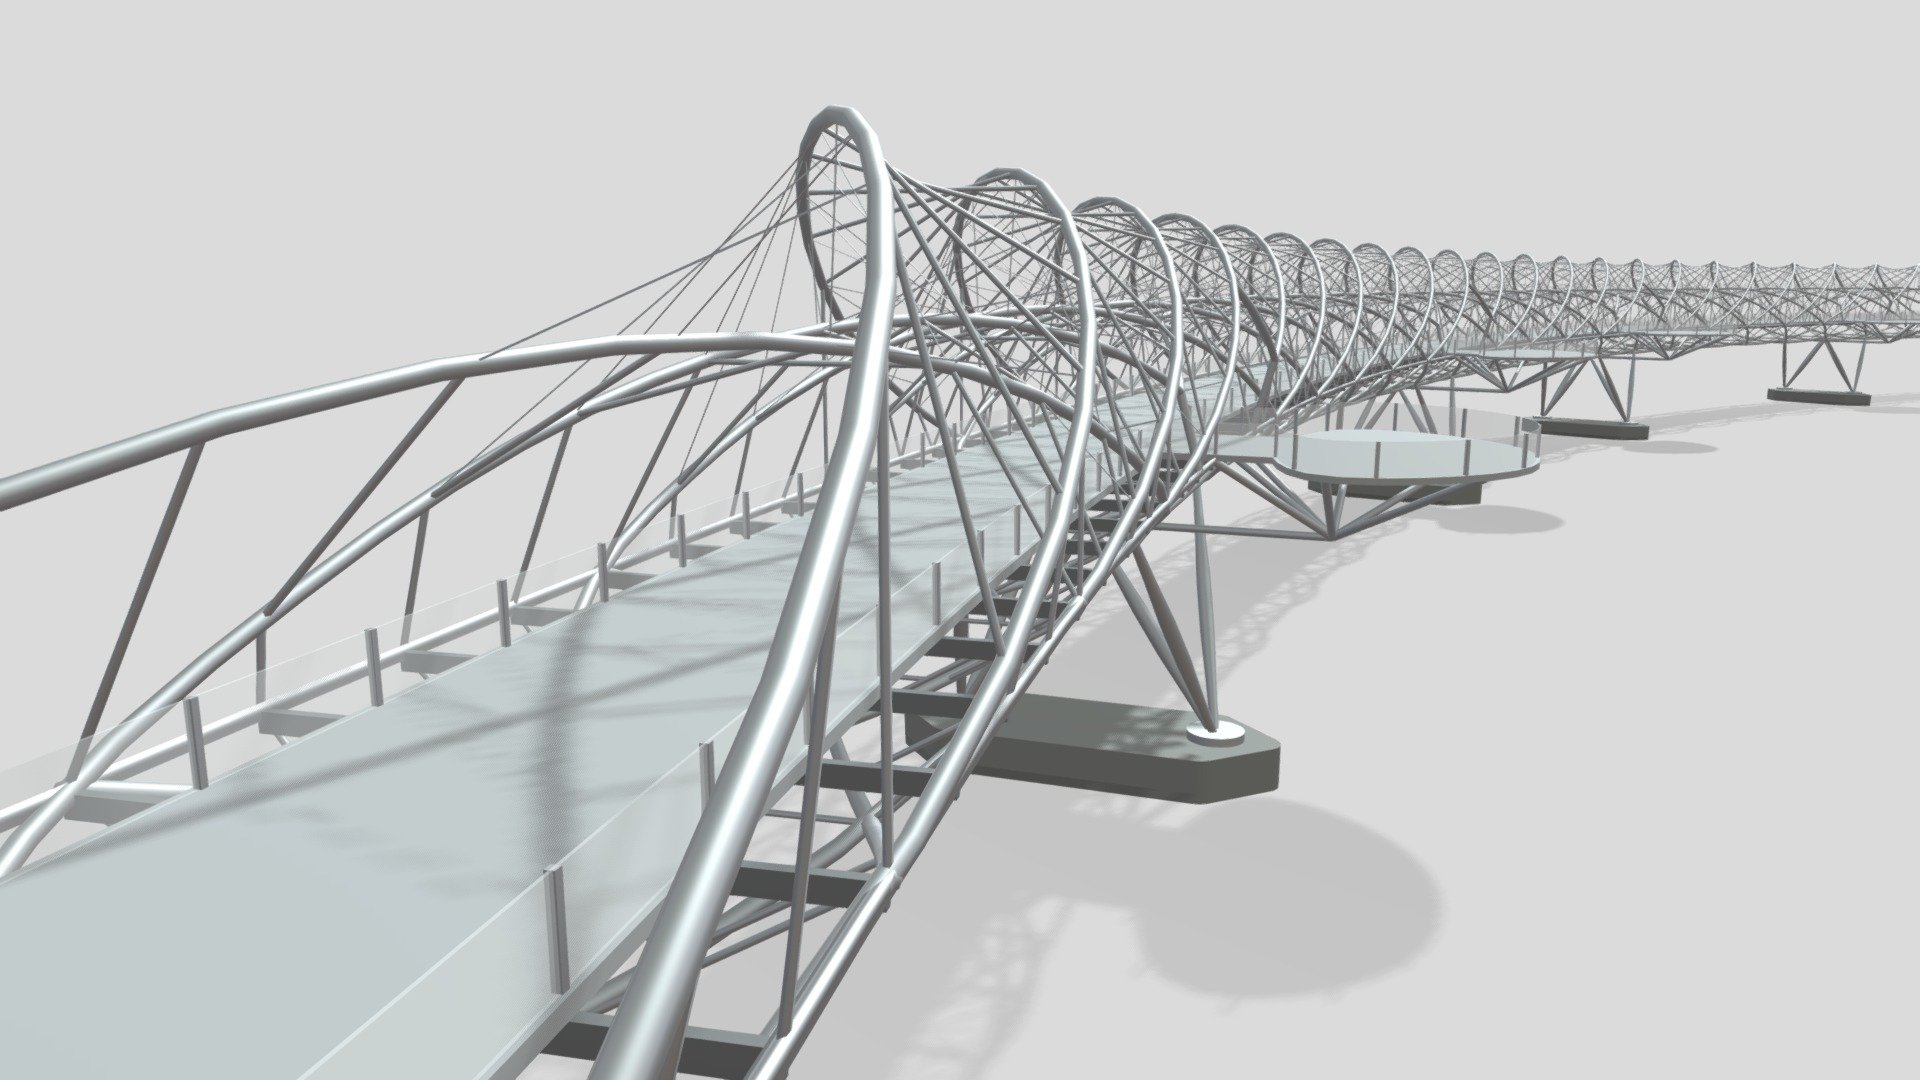 The Helix Bridge, officially The Helix, and previously known as the Double Helix Bridge, is a pedestrian bridge linking Marina Centre with Marina South in the Marina Bay area in Singapore.

Thank you Parametricks for this amazing tutorial: https://www.youtube.com/c/Parametricks

If you like this 3d model, please like, comment and follow me.
Check out my new fighter jet shooter game: : https://play.google.com/store/apps/details?id=com.YourCompany.airtoair - Helix Bridge - Download Free 3D model by Sengchor 3d model